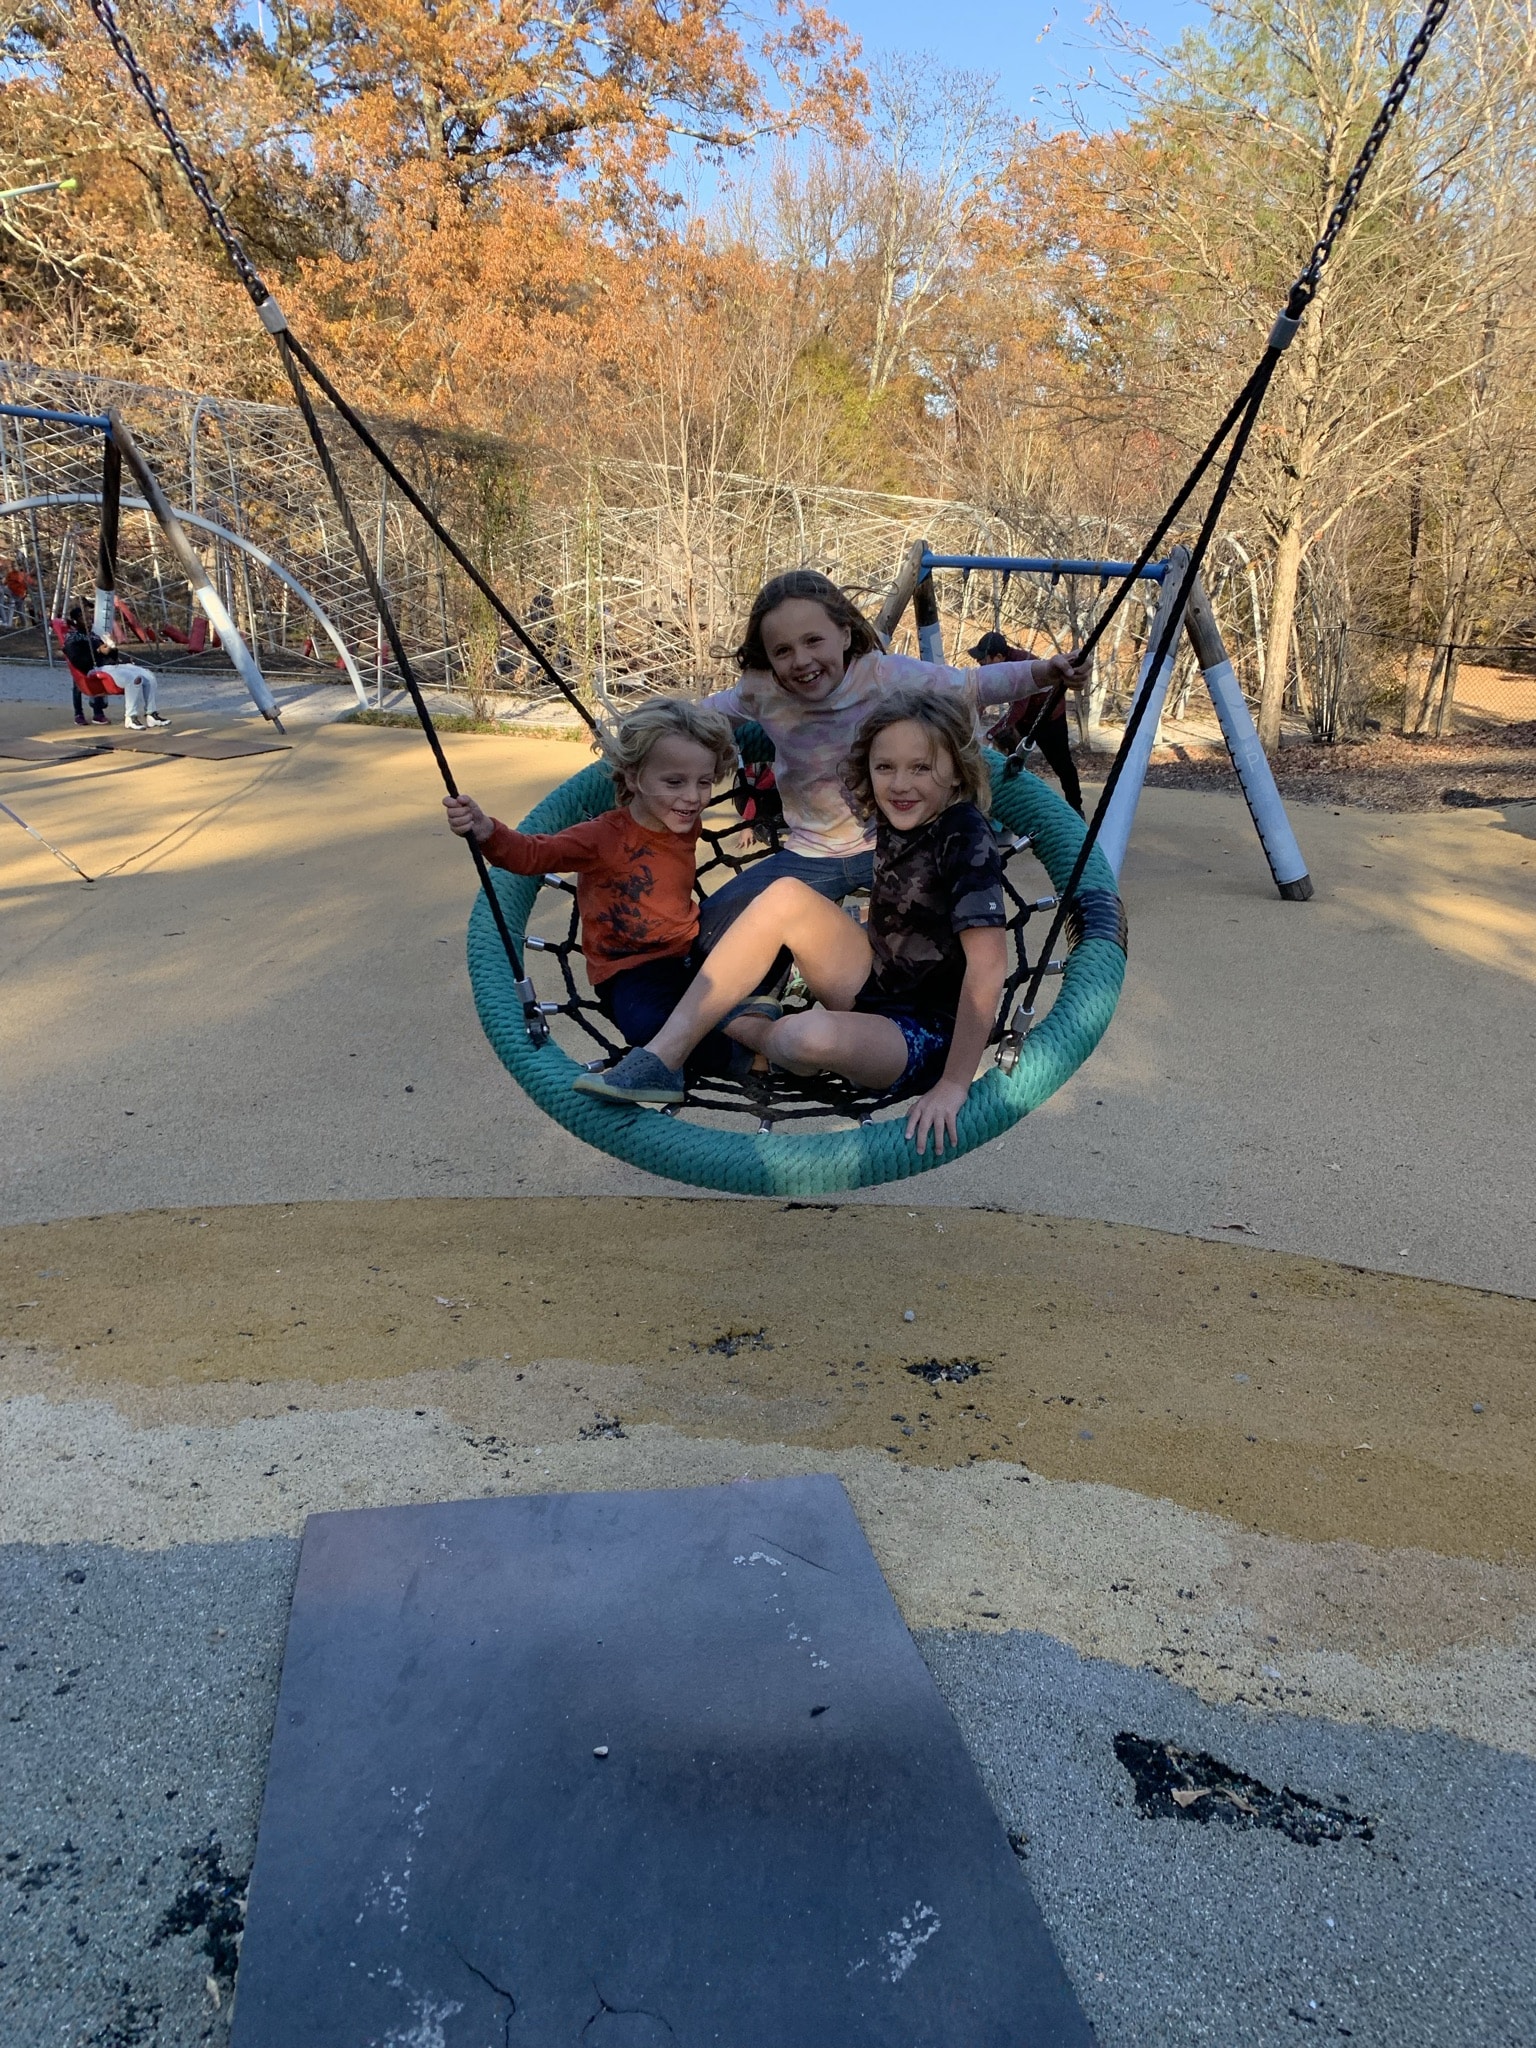 outdoor play is crucial for a homeschool mom